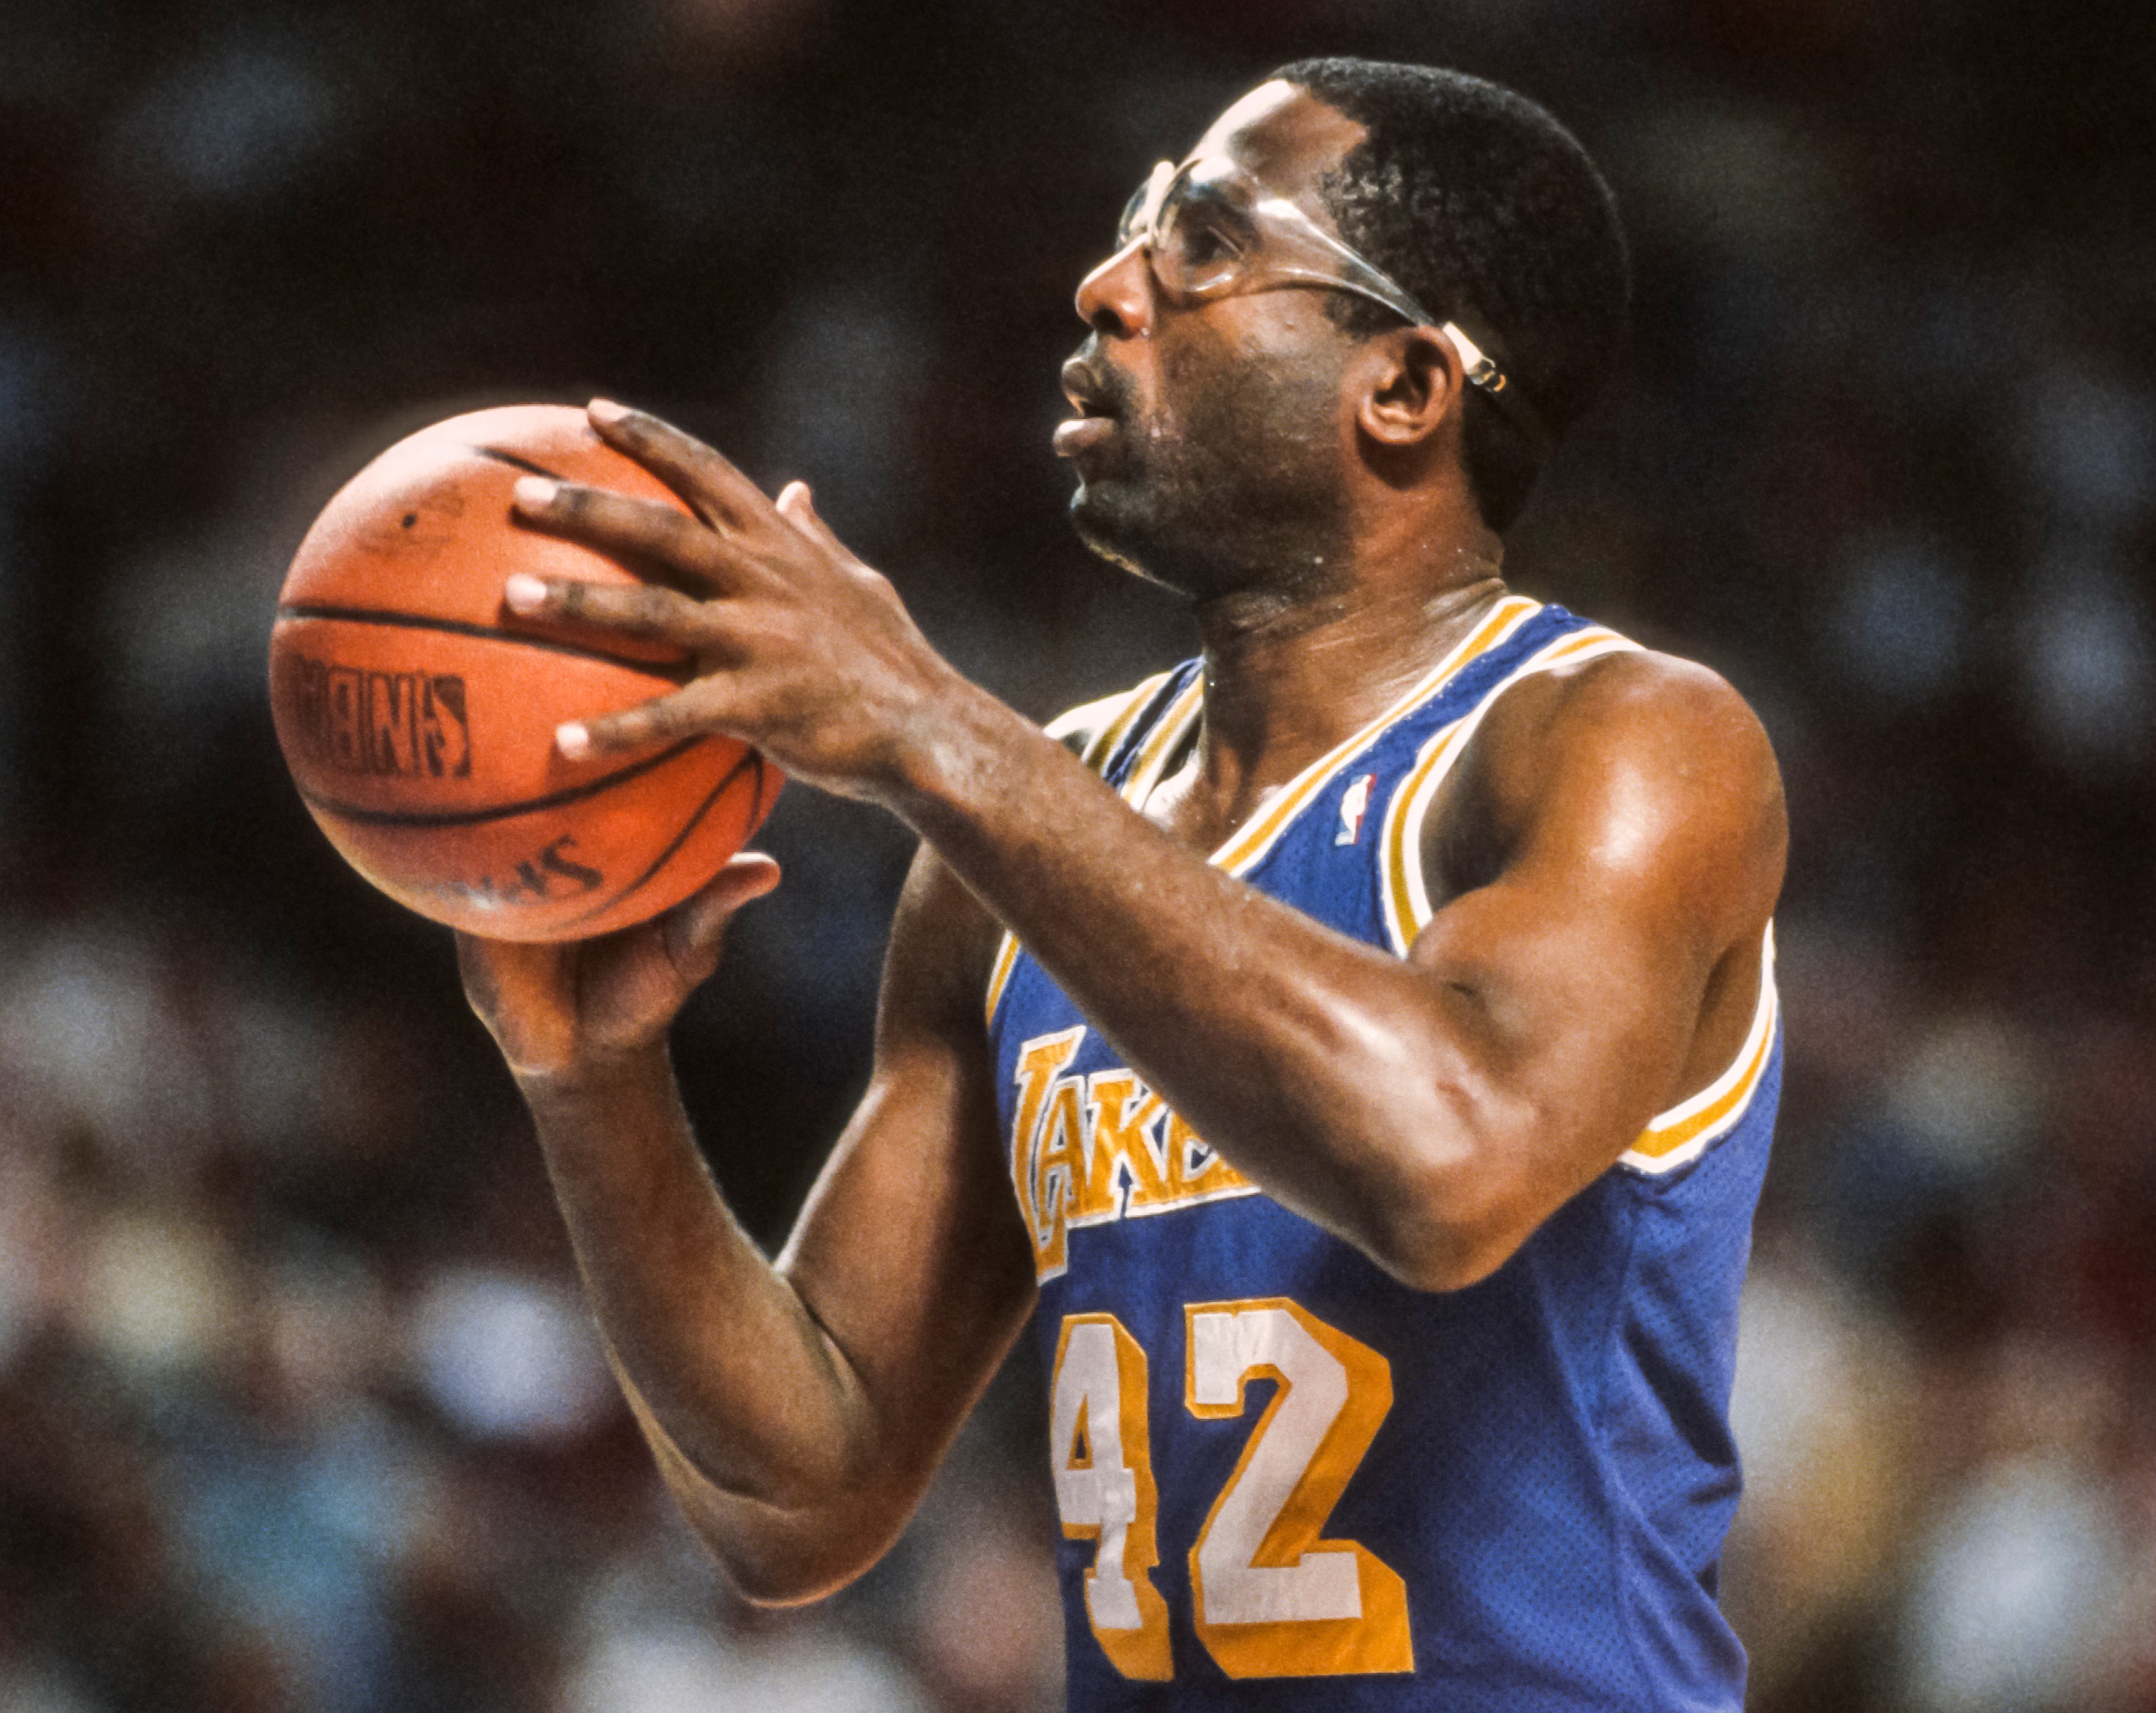 A Scared James Worthy Won His Unexpected Fight In His Home When He First Moved to LA